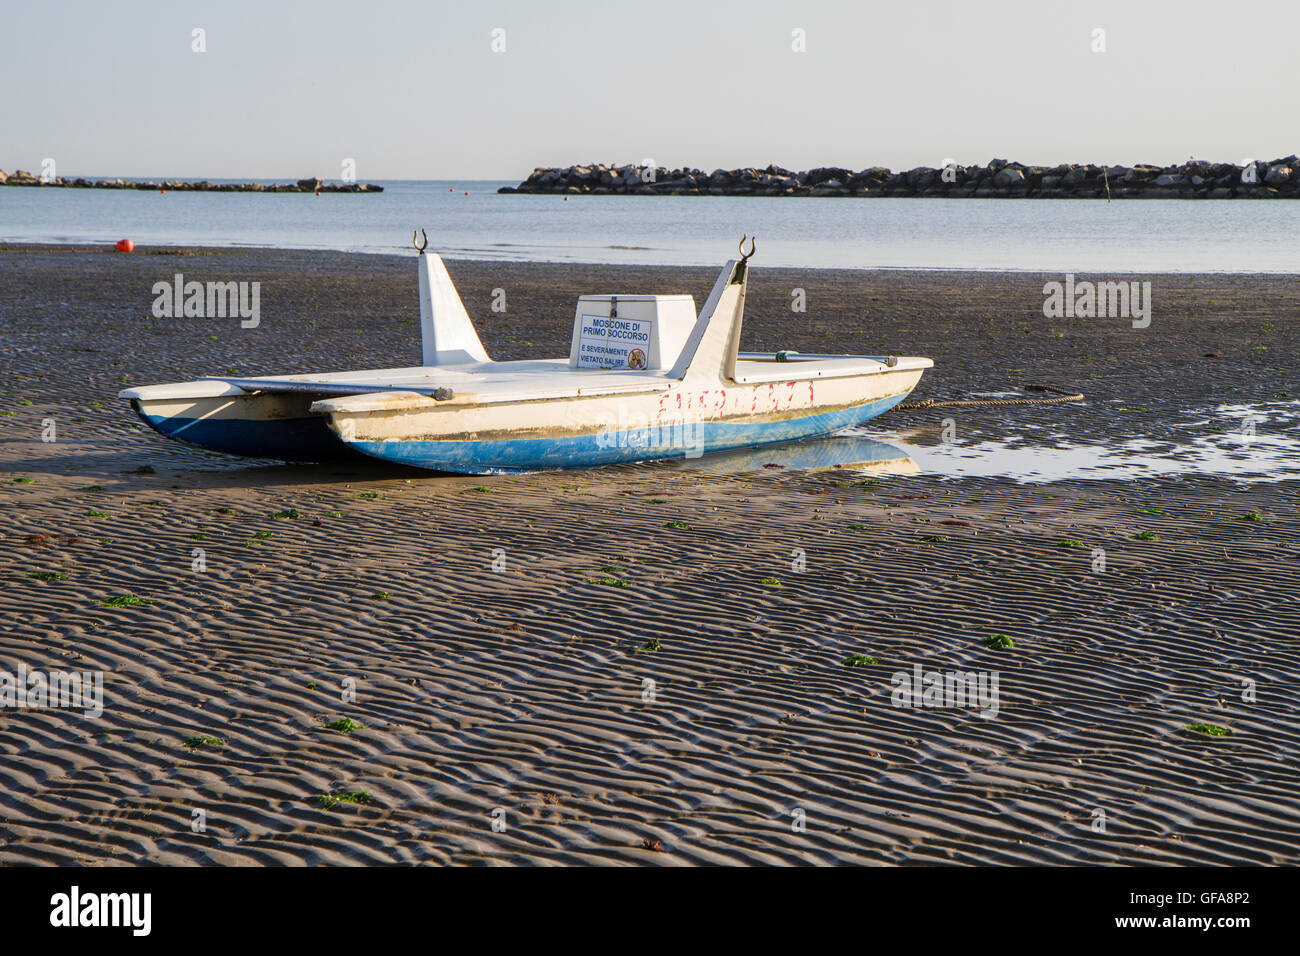 typical wooden lifeboat on the Italian Adriatic coast beach Stock Photo